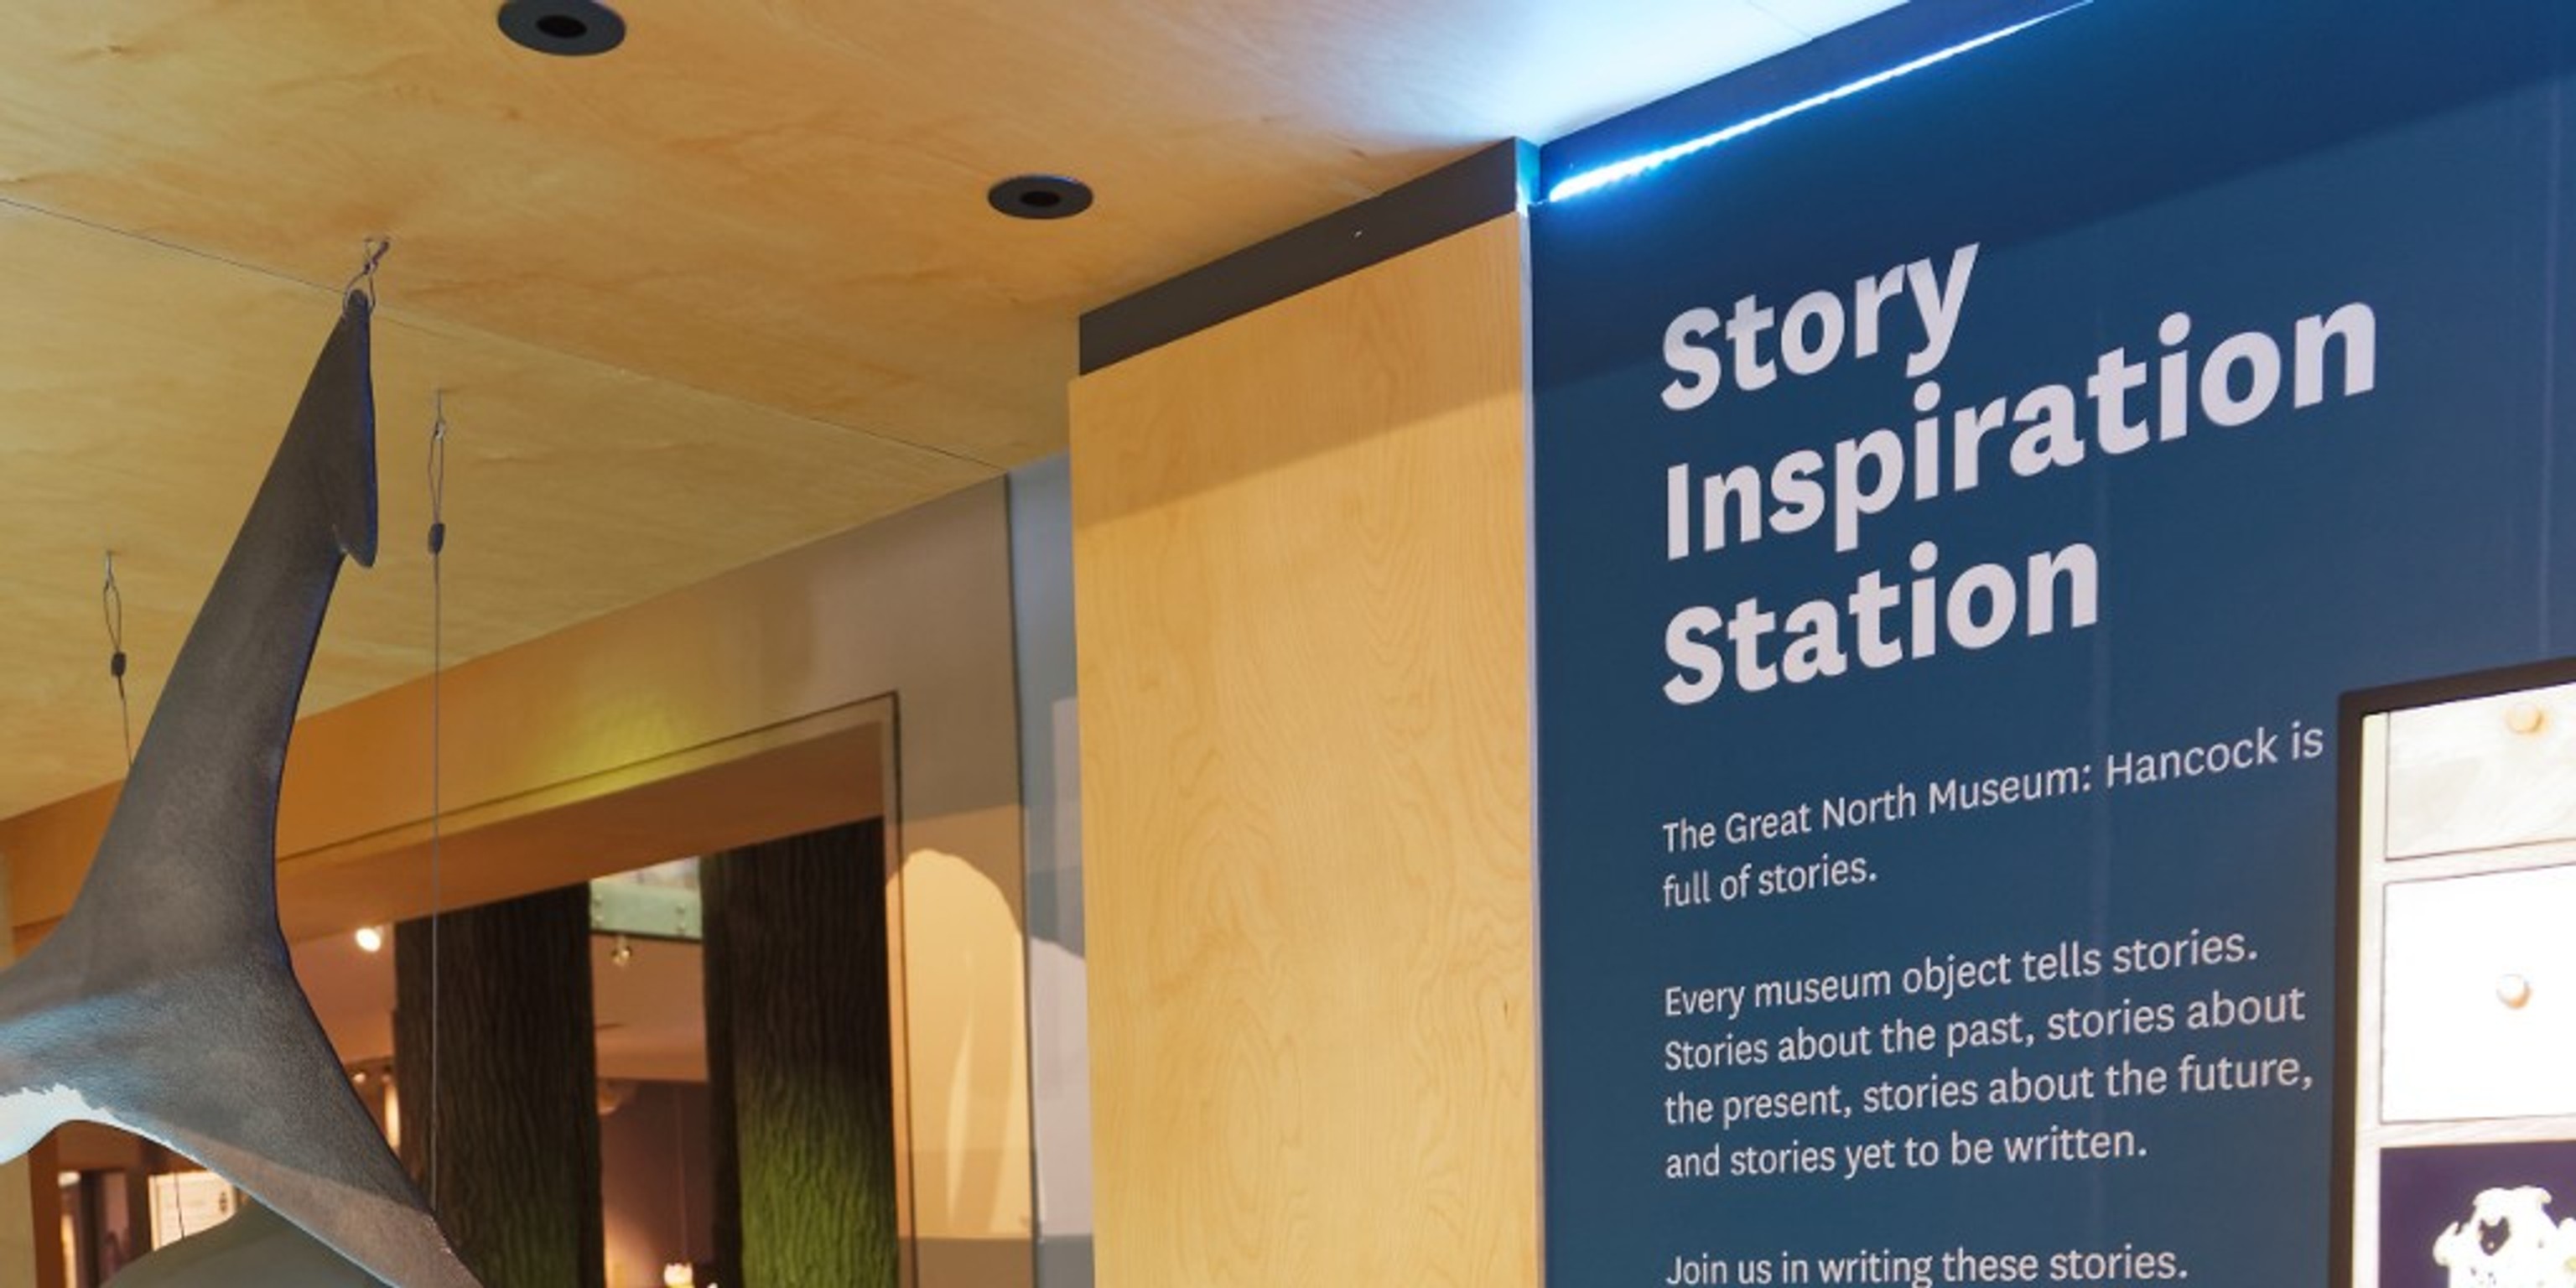 Story Inspiration Station: tell your story at the Great North Museum